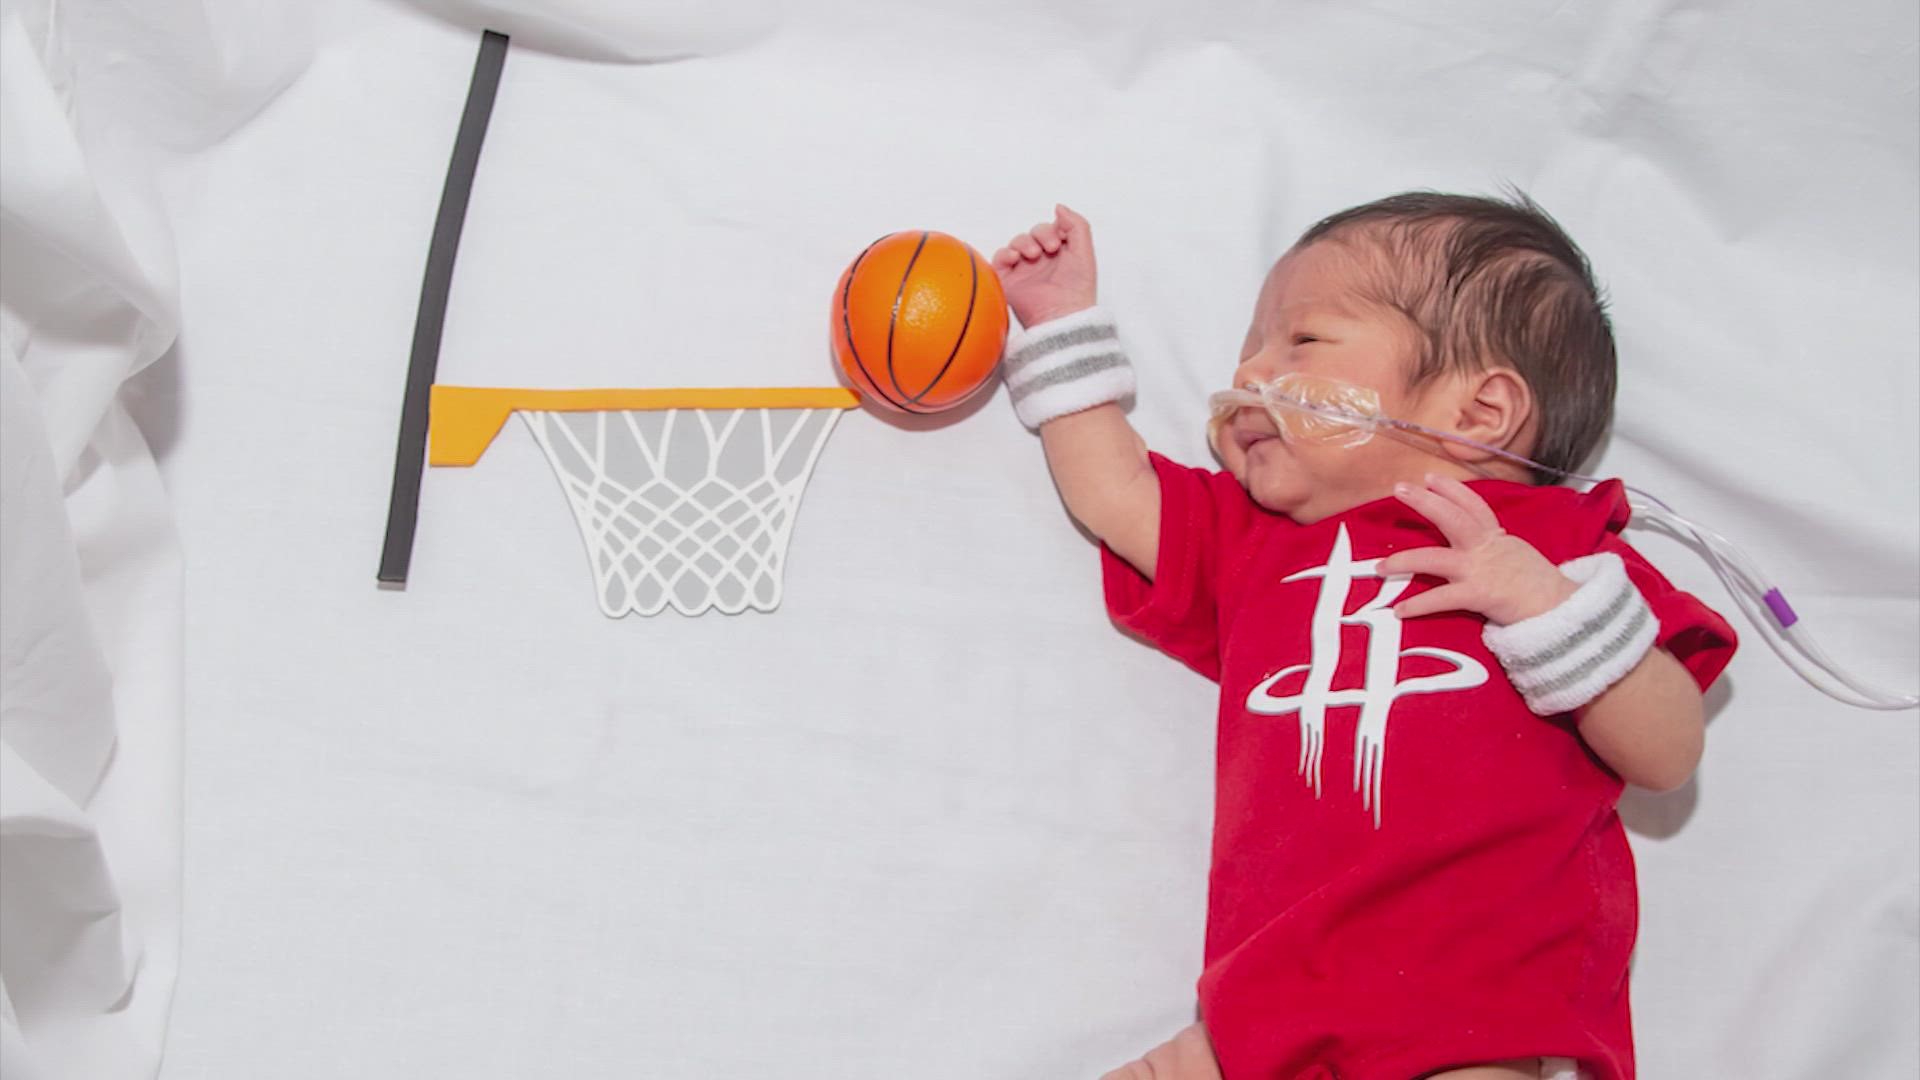 The newest, cutest and tiniest Rockets fans are getting slam-dunk care in the NICU unit at Memorial Hermann.